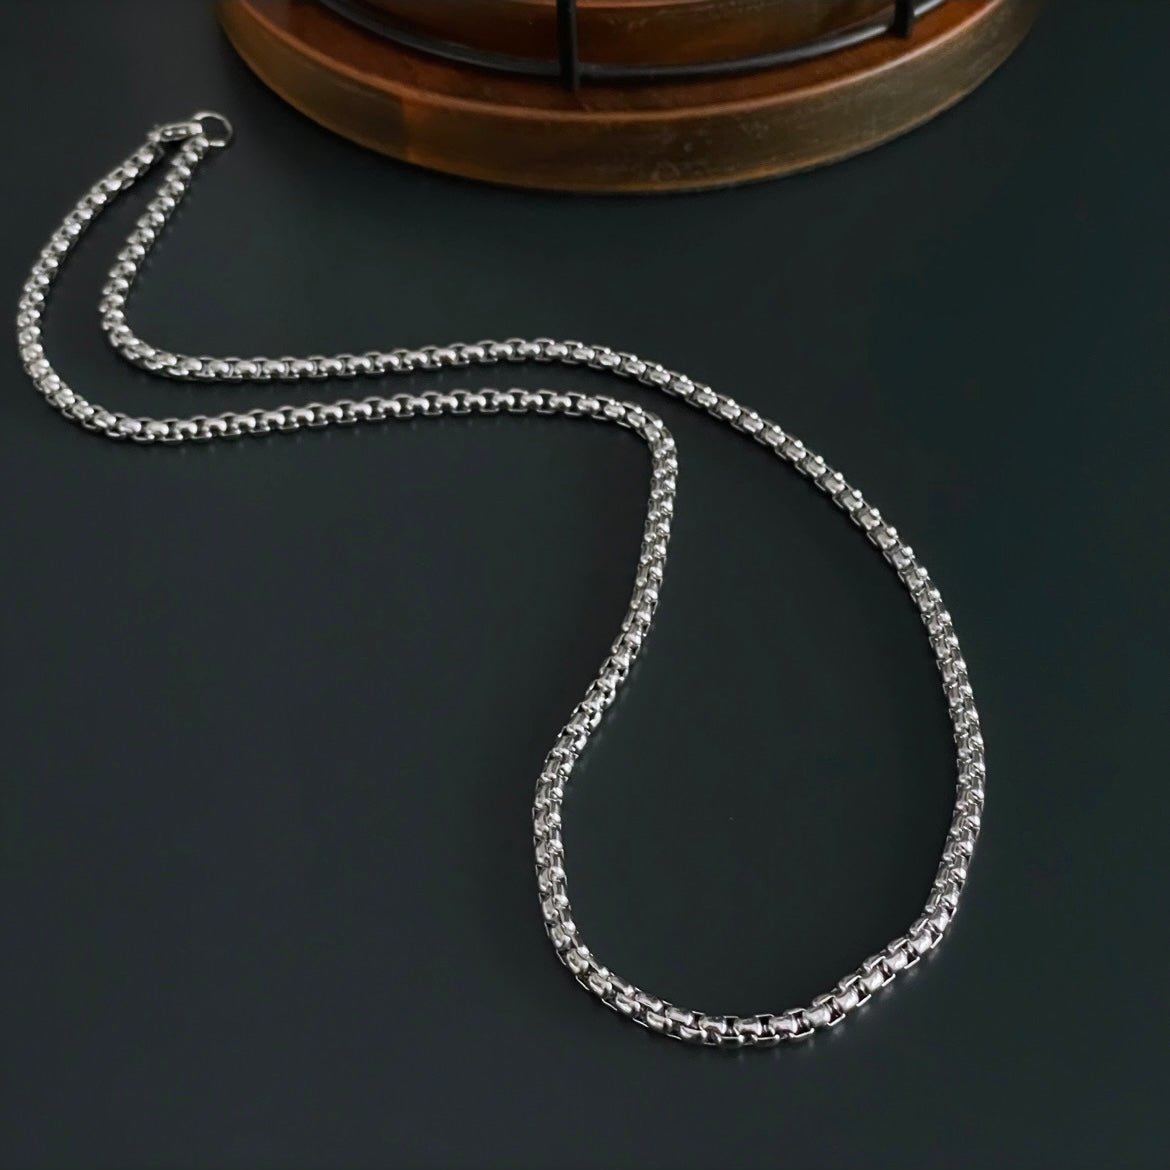 Casimir stainless steel chain